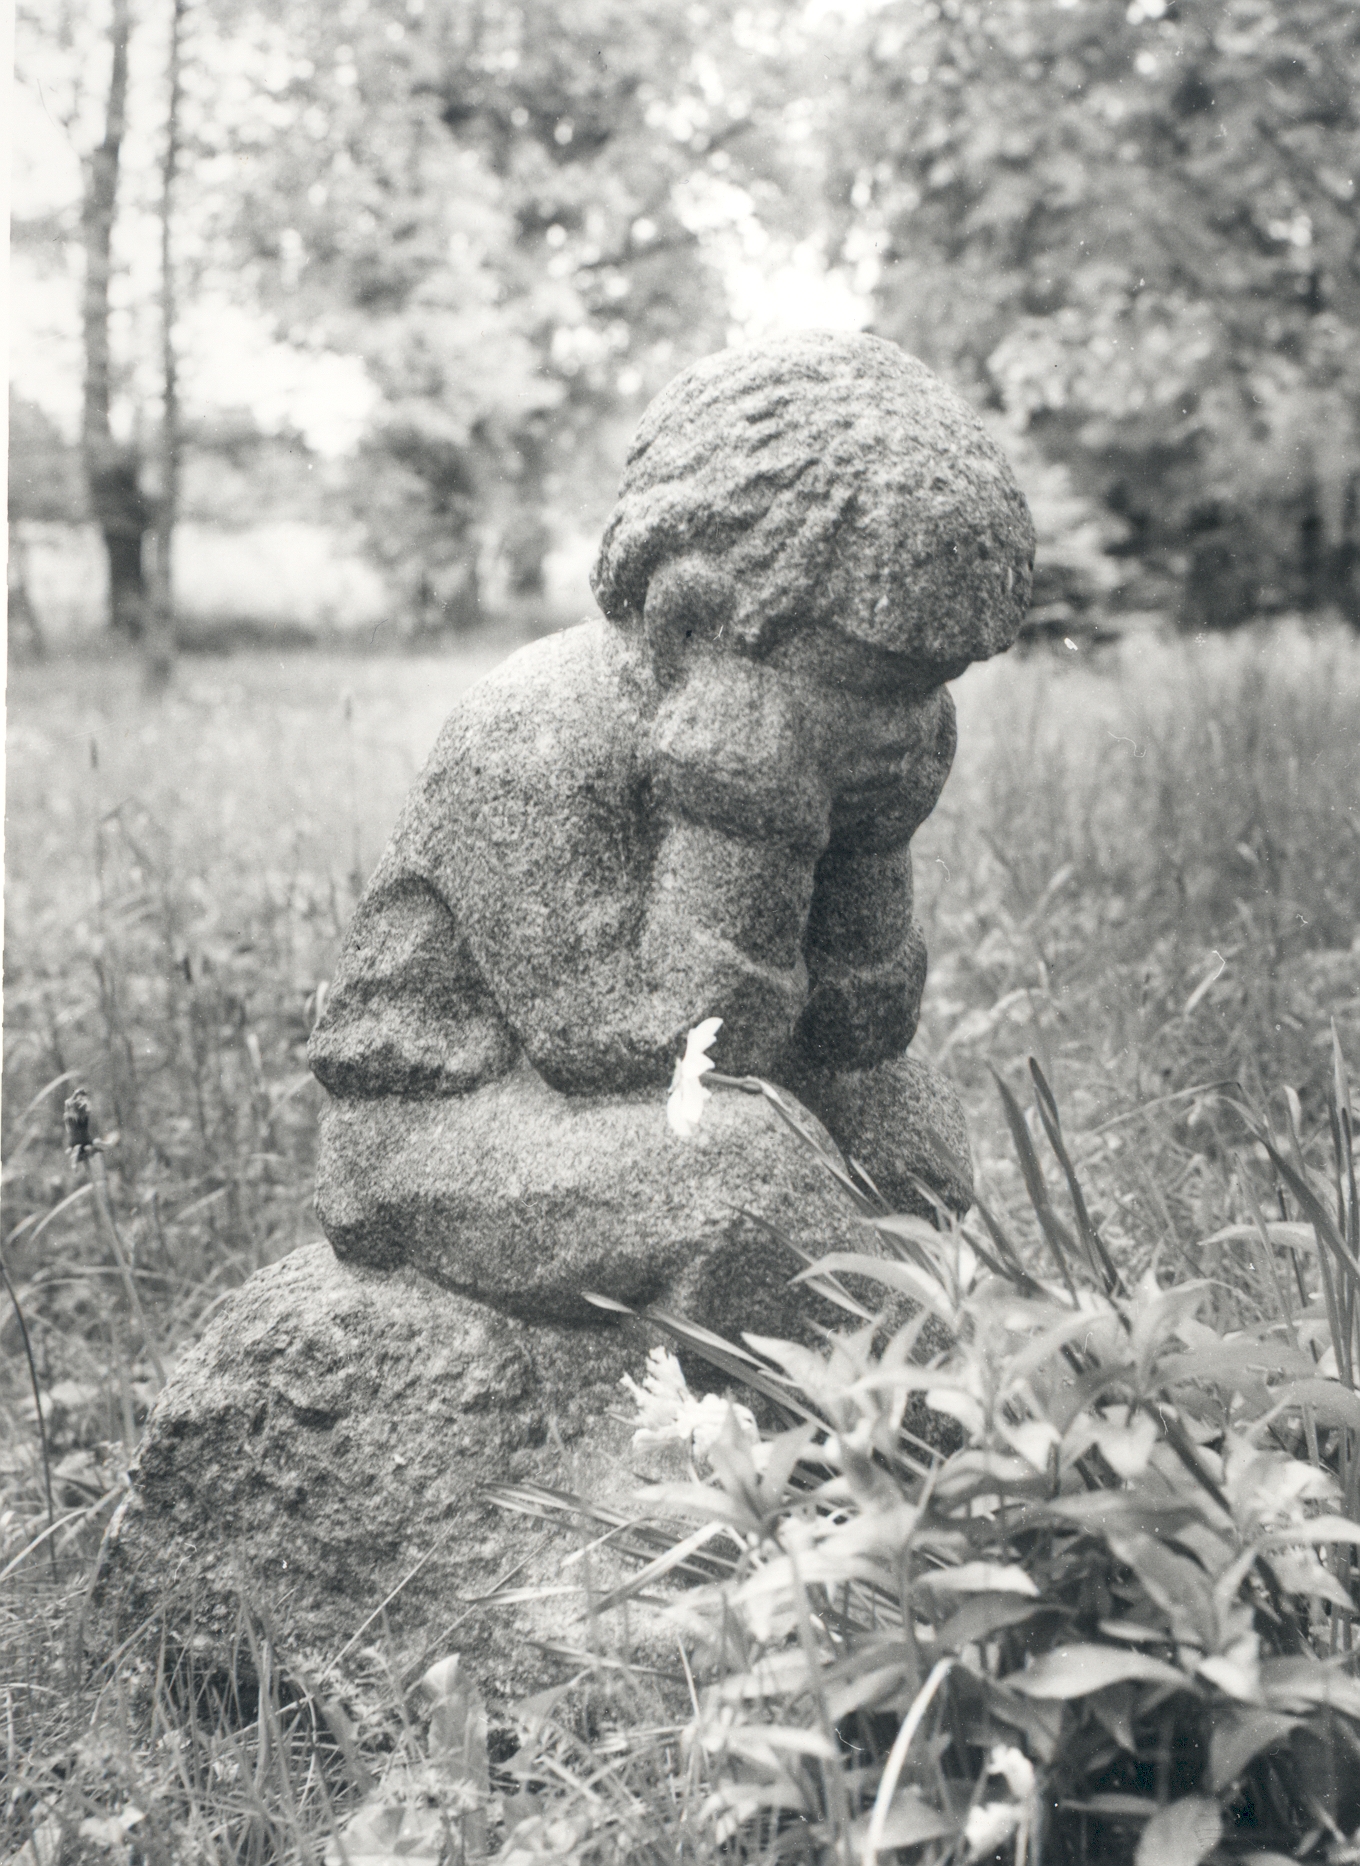 From km employees' expedition 1986. a. Small Illimari sculpture in Uderna School Park